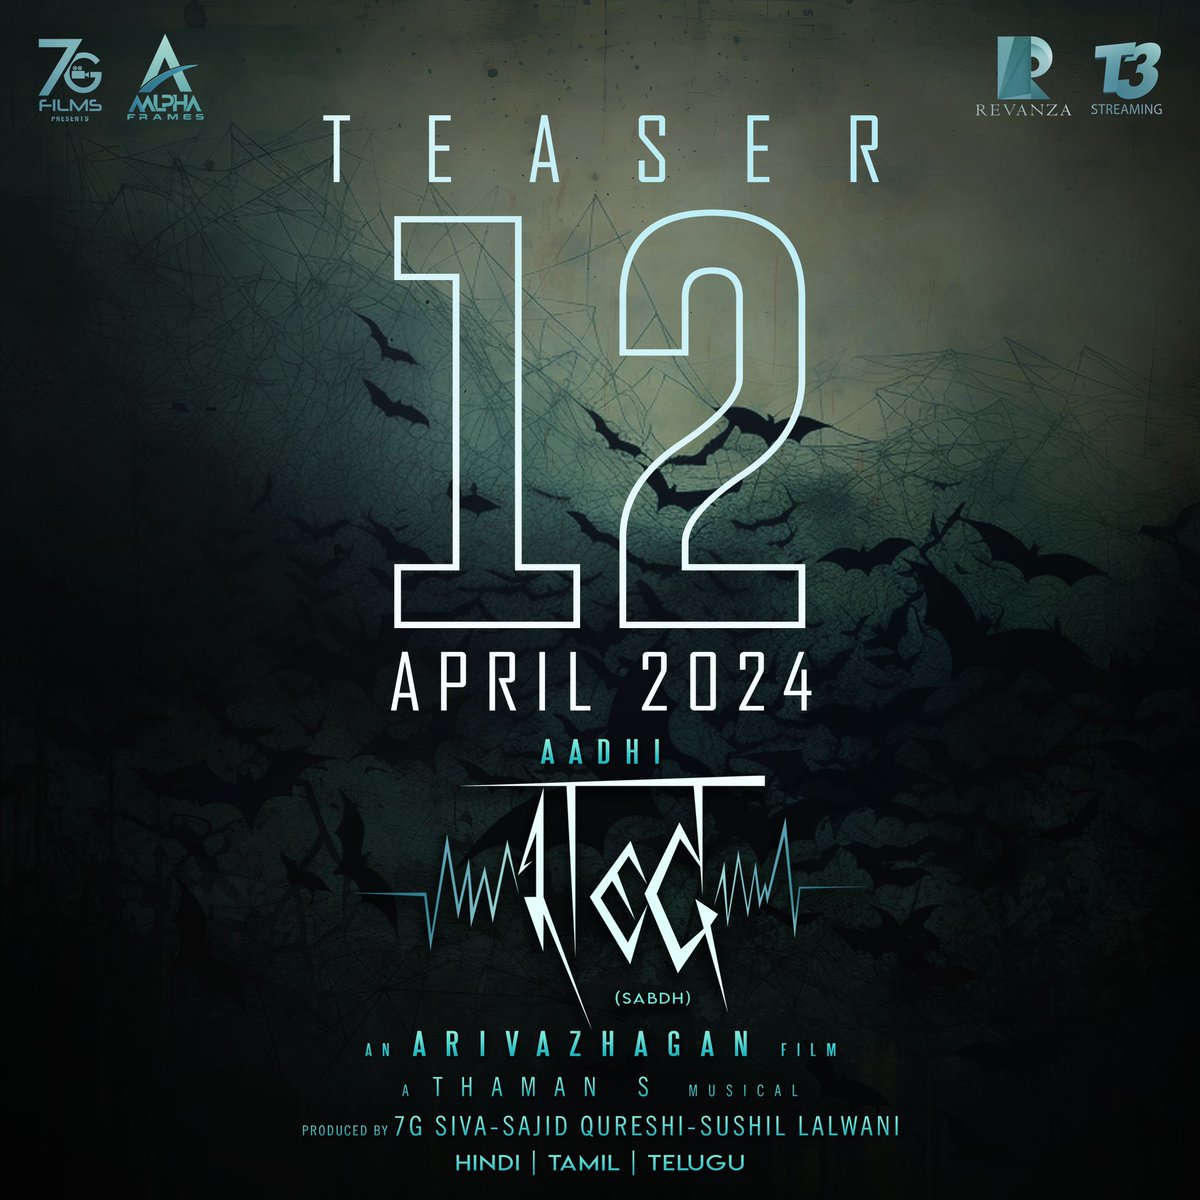 #Eeram and #Vaishali Combo is Back💥Heed the whispers, for dread lies in wait🔊The chilling #Sabdham Teaser shall unveil its secrets on the ominous eve of April 12th✨

An @dirarivazhagan Film 
A @MusicThaman Musical

Produced by 
@7GFilmsSiva